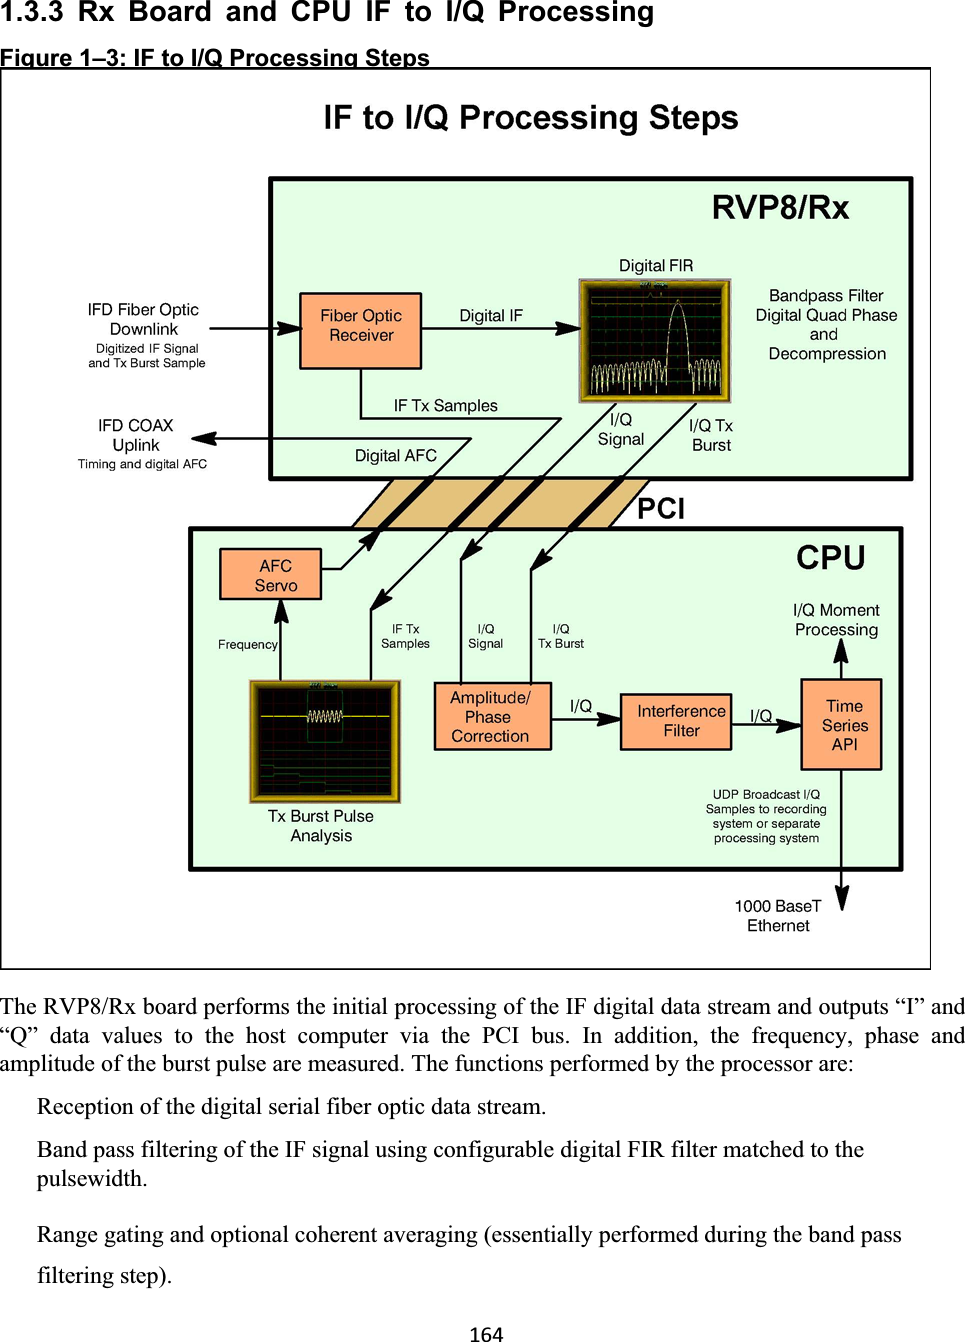 1641.3.3 Rx Board and CPU IF to I/Q ProcessingFigure 1–3: IF to I/Q Processing Steps The RVP8/Rx board performs the initial processing of the IF digital data stream and outputs “I” and“Q” data values to the host computer via the PCI bus. In addition, the frequency, phase andamplitude of the burst pulse are measured. The functions performed by the processor are:  Reception of the digital serial fiber optic data stream.  Band pass filtering of the IF signal using configurable digital FIR filter matched to the pulsewidth.Range gating and optional coherent averaging (essentially performed during the band pass filtering step).